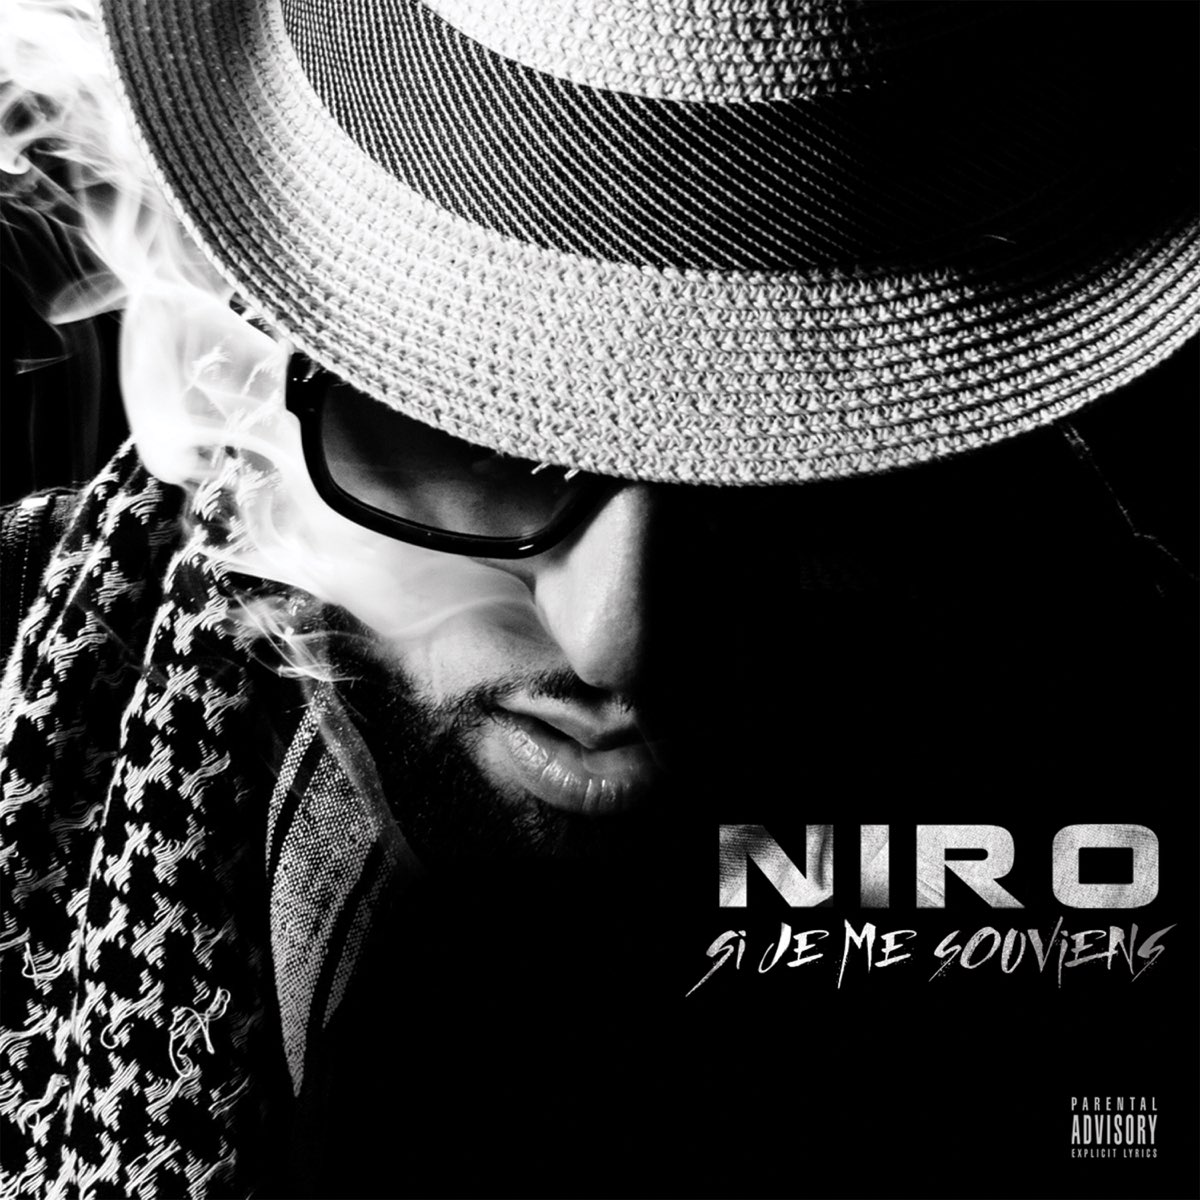 Si je me souviens by Niro on Apple Music